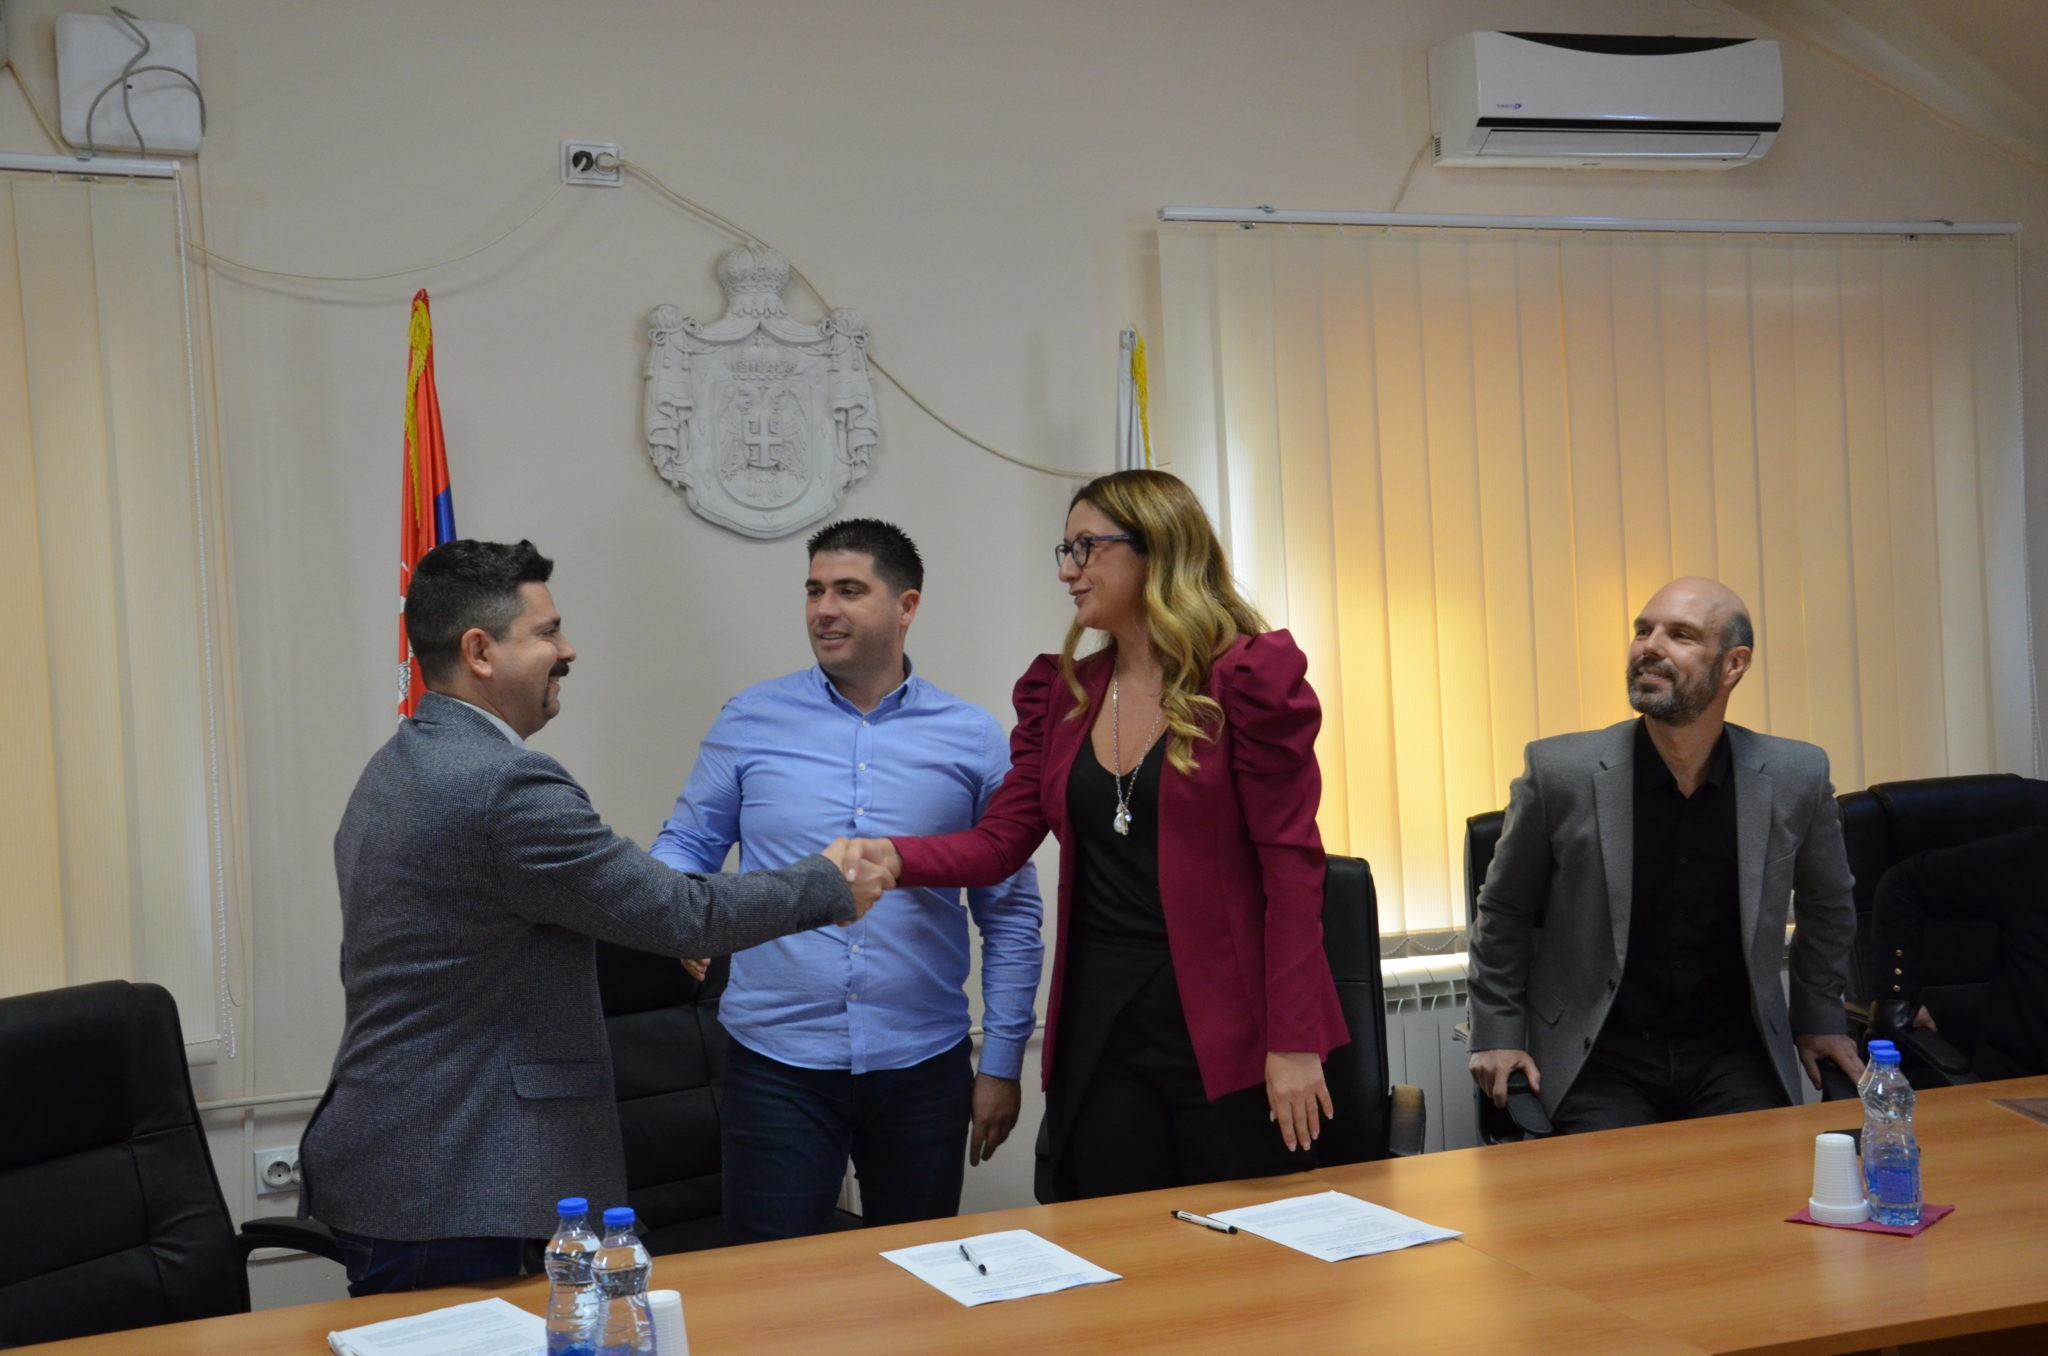 The launch of a revolving fund in Bela Palanka with representatives of the municipality, Regional Development Agencies—South, and Divac Foundation.